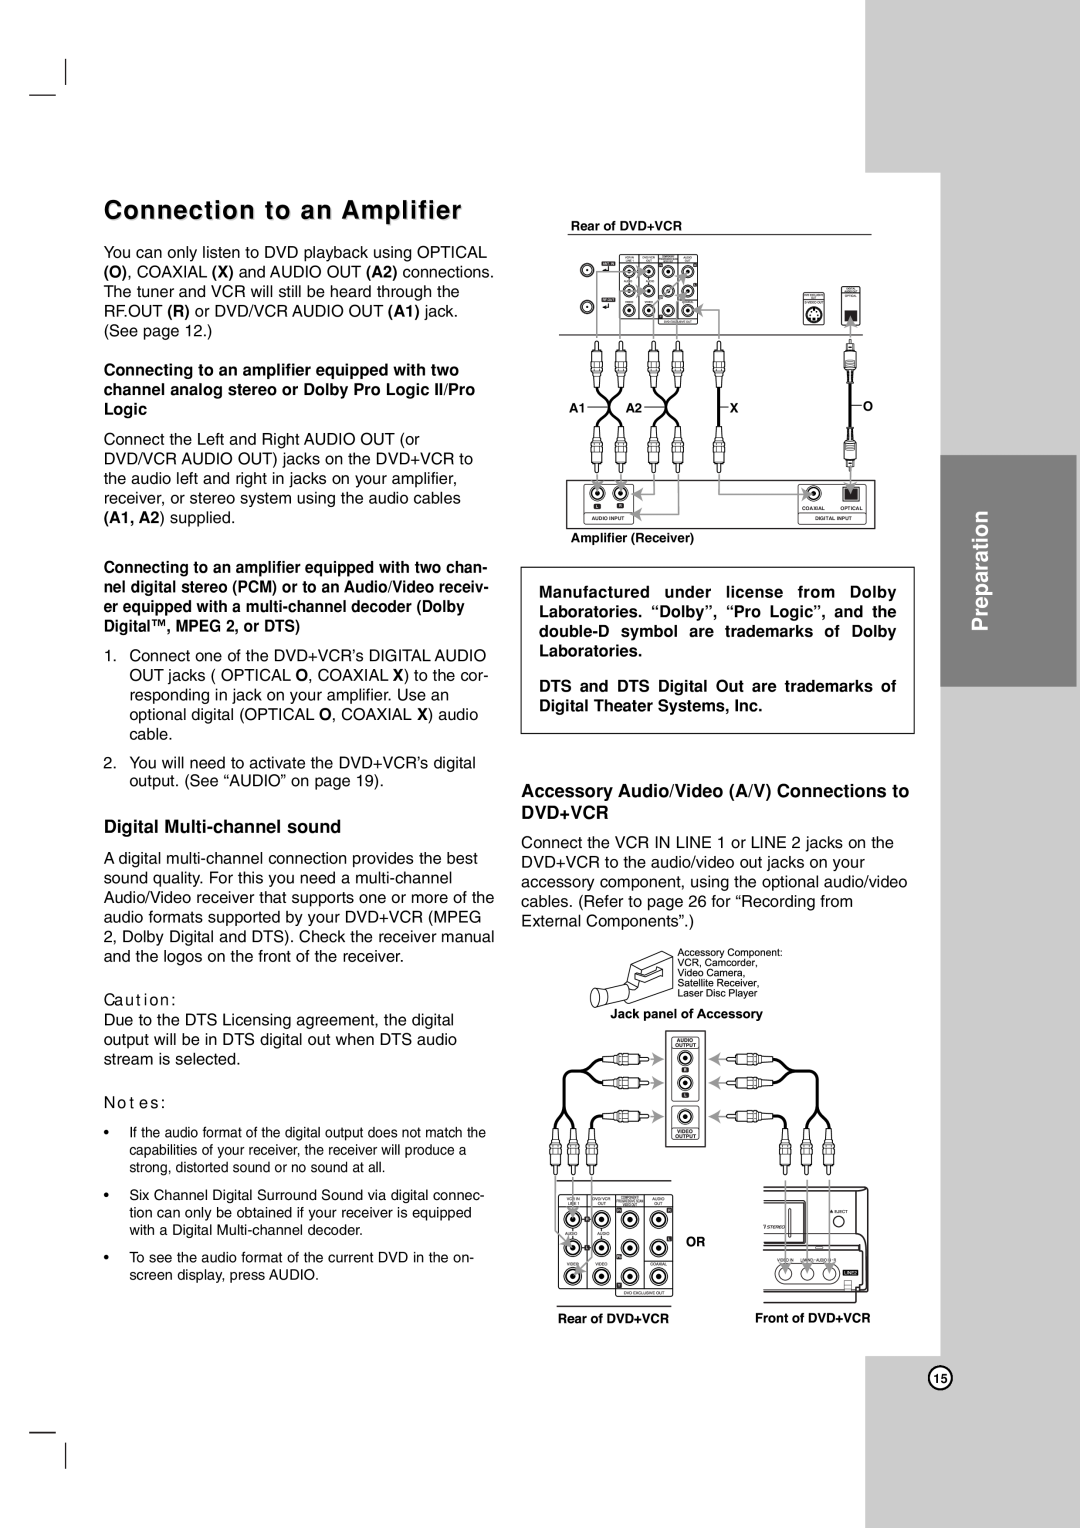 LG Electronics LDX-514 owner manual Connection to an Amplifier, Digital Multi-channel sound, Preparation 